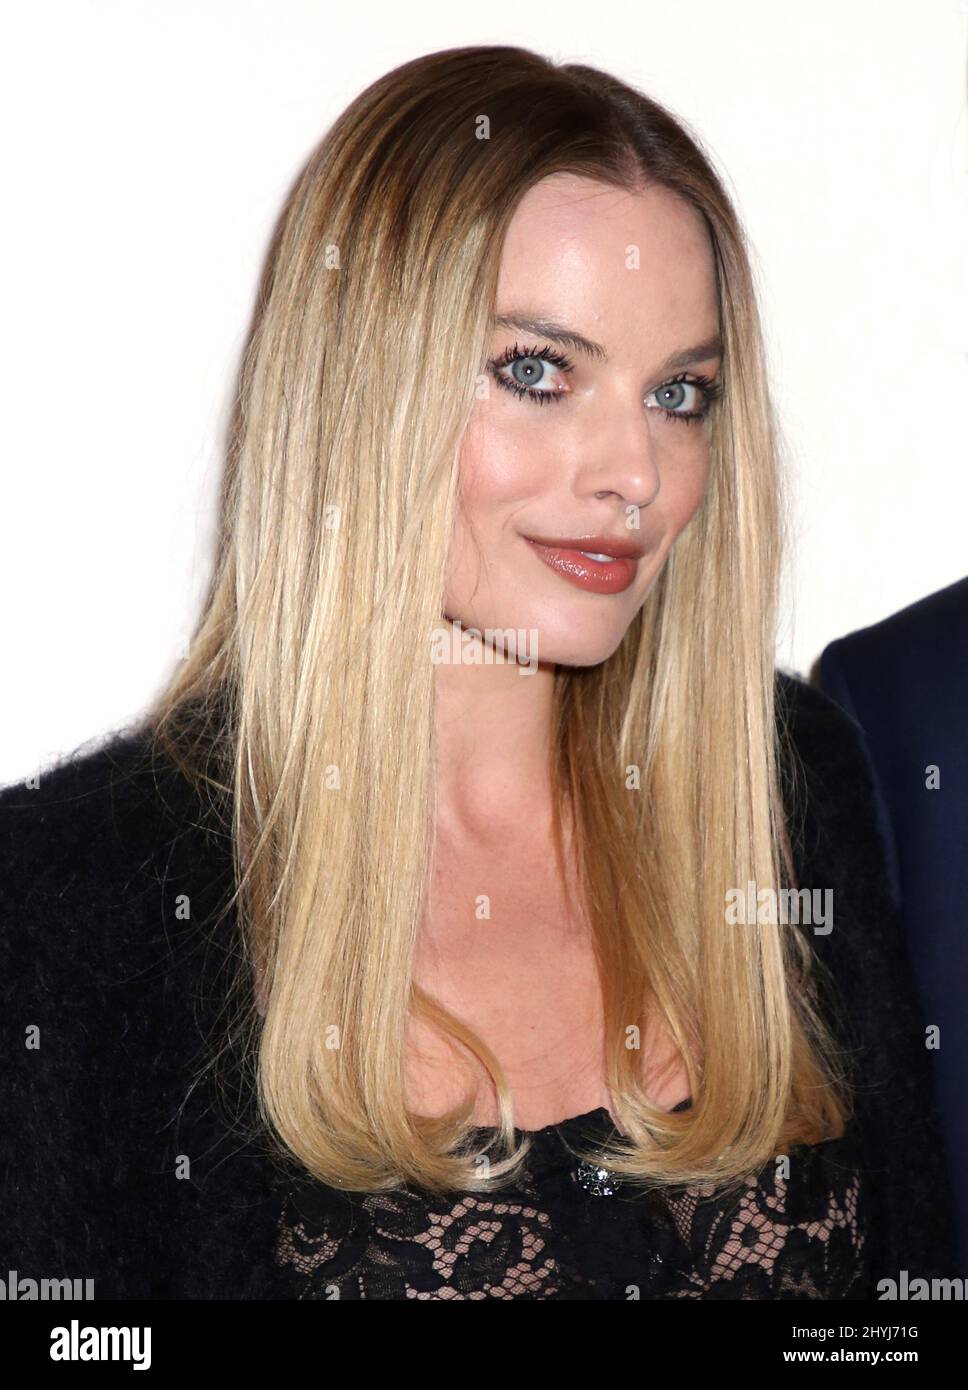 Margot Robbie attending the 2019 Tribeca Film Festival 'Dreamland' Premiere held at the Stella Artois Theatre on April 28, 2019 in New York City, NY Stock Photo